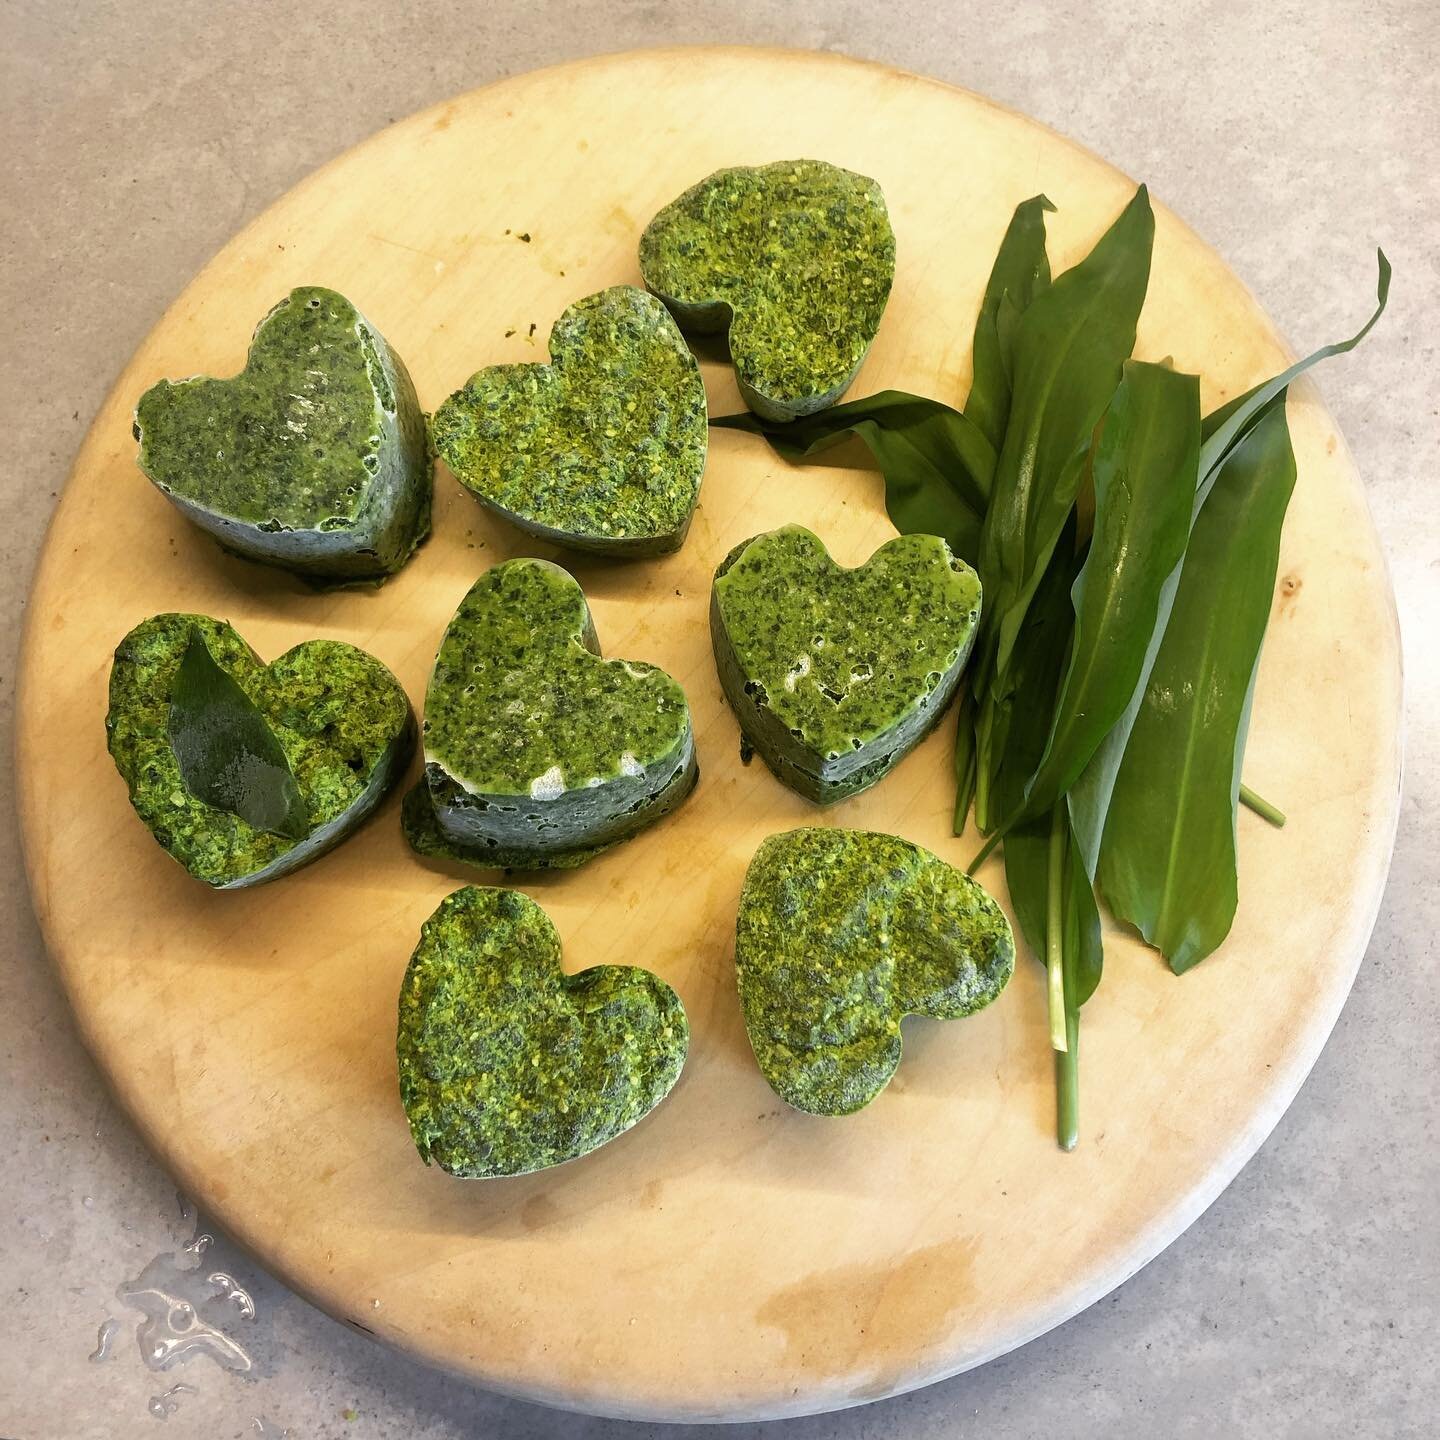 Wild garlic frozen hearts. Not for Vampire consumption. Just a bit of unrelated to jewellery activity. Why not try making Wild Garlic Pesto it really is so easy and very yummy. Why not go down to the woods today. 
.
.
.
#wildgarlic #wildgarlicpesto #